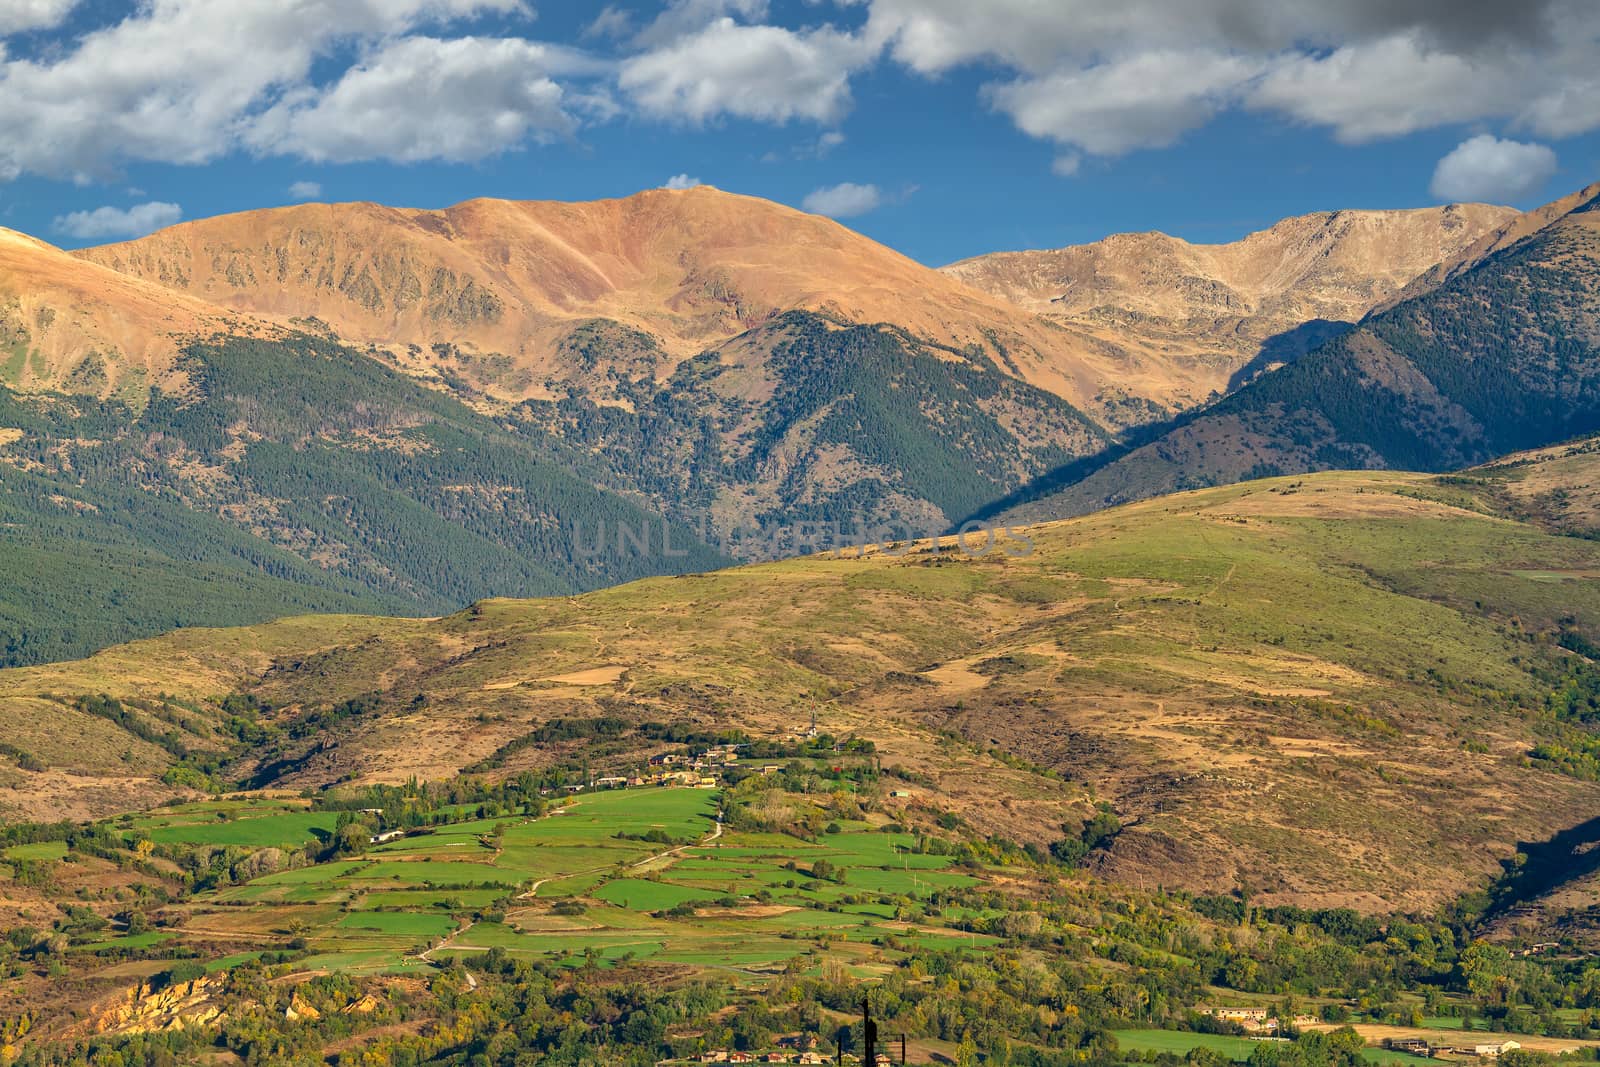 Pyrenees mountain from Catalonia of Spain in a sunny day by Digoarpi